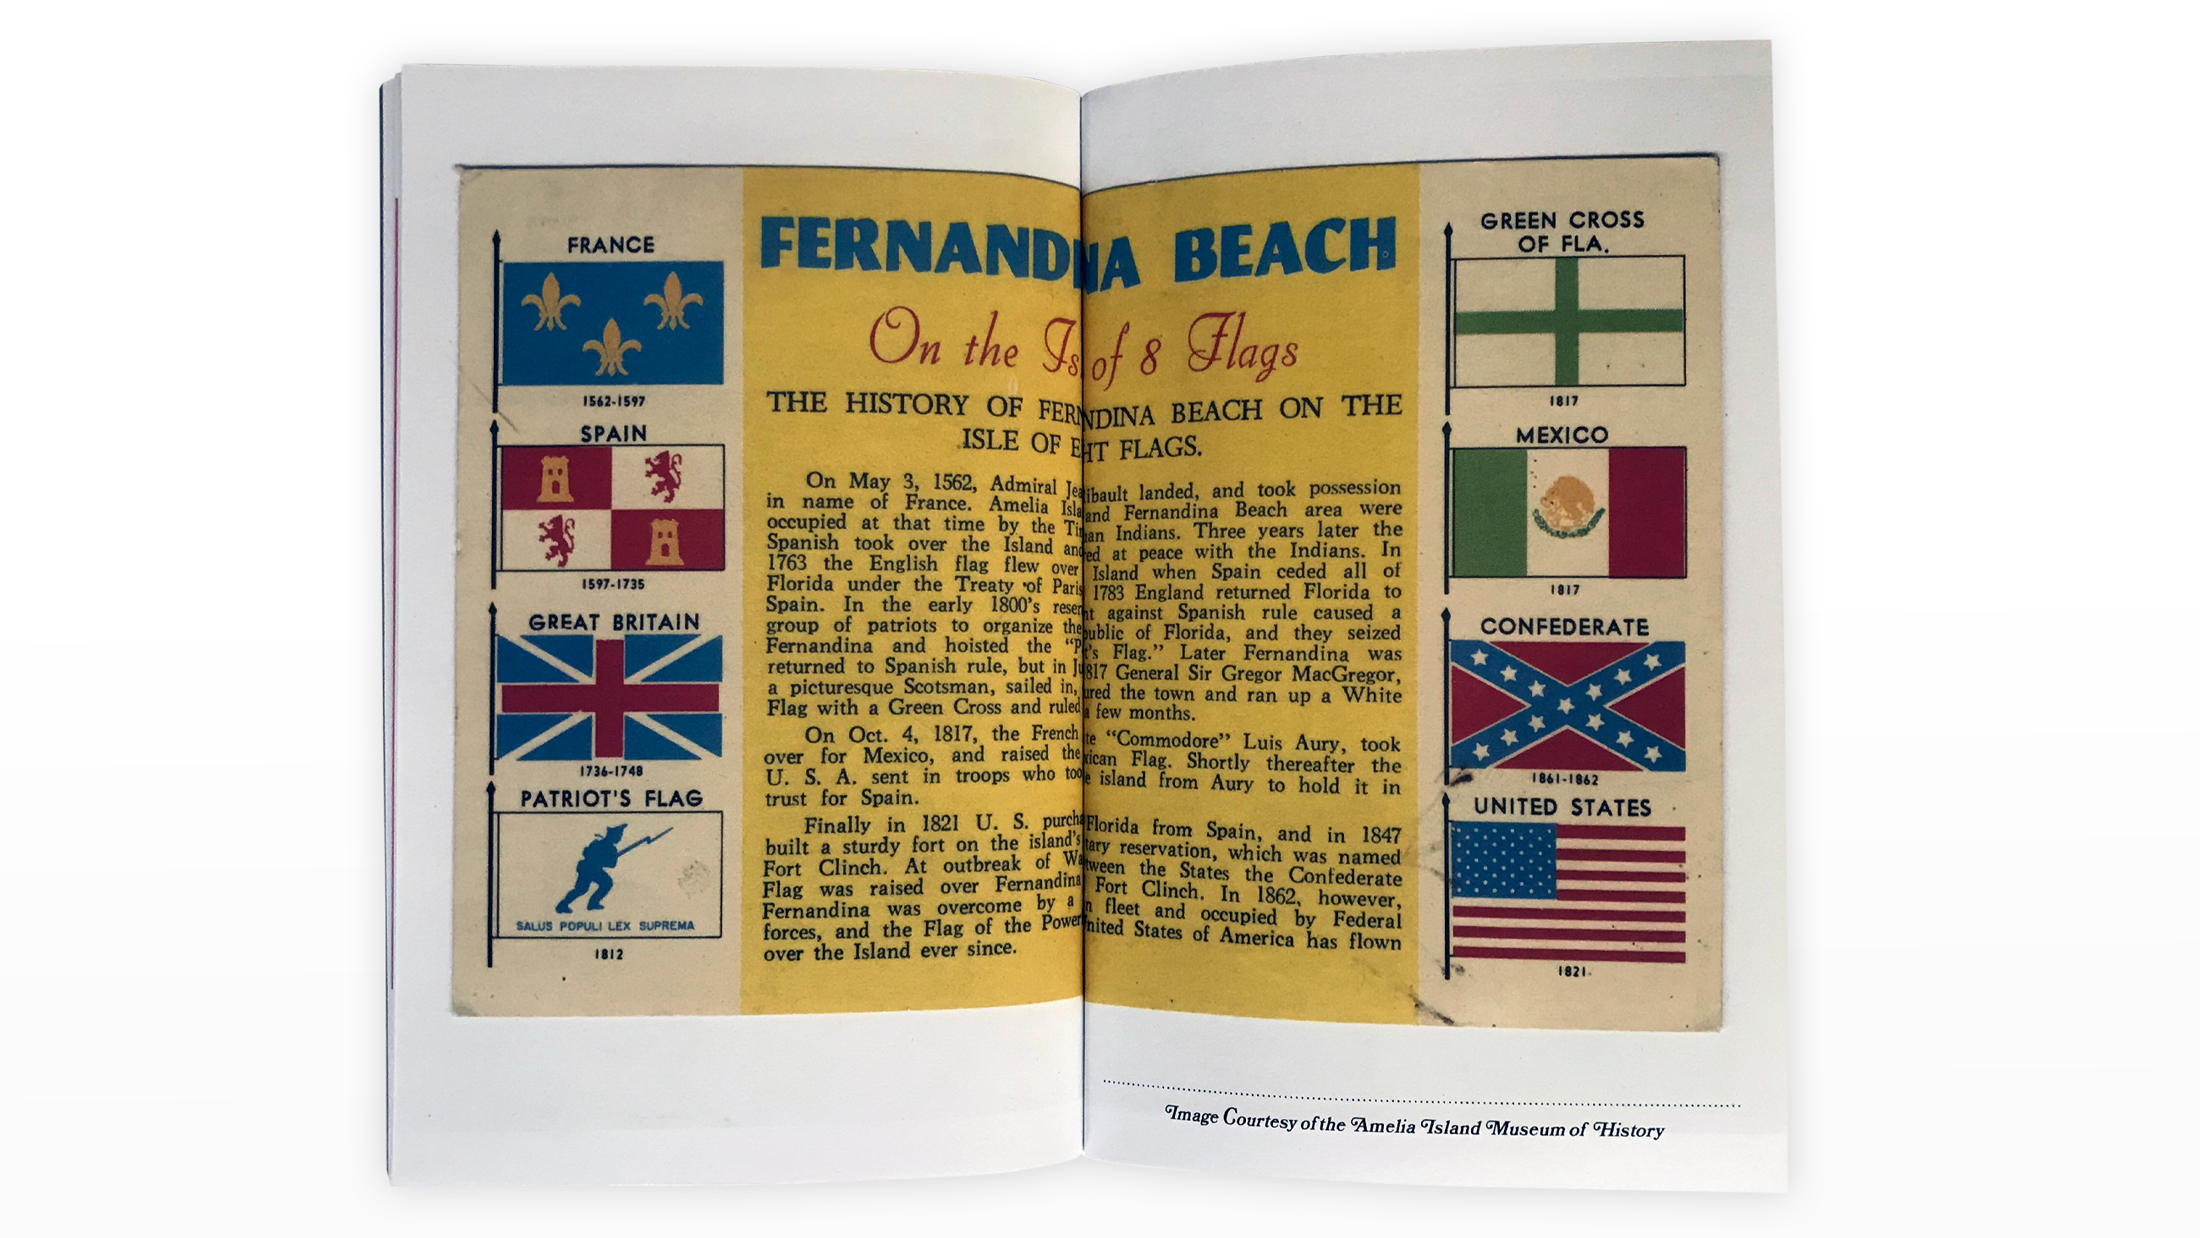 The History of Fernandina Beach on the Isle of 8 Flags in the first issue of The Islandia Journal: A (Sub)Tropical Periodical